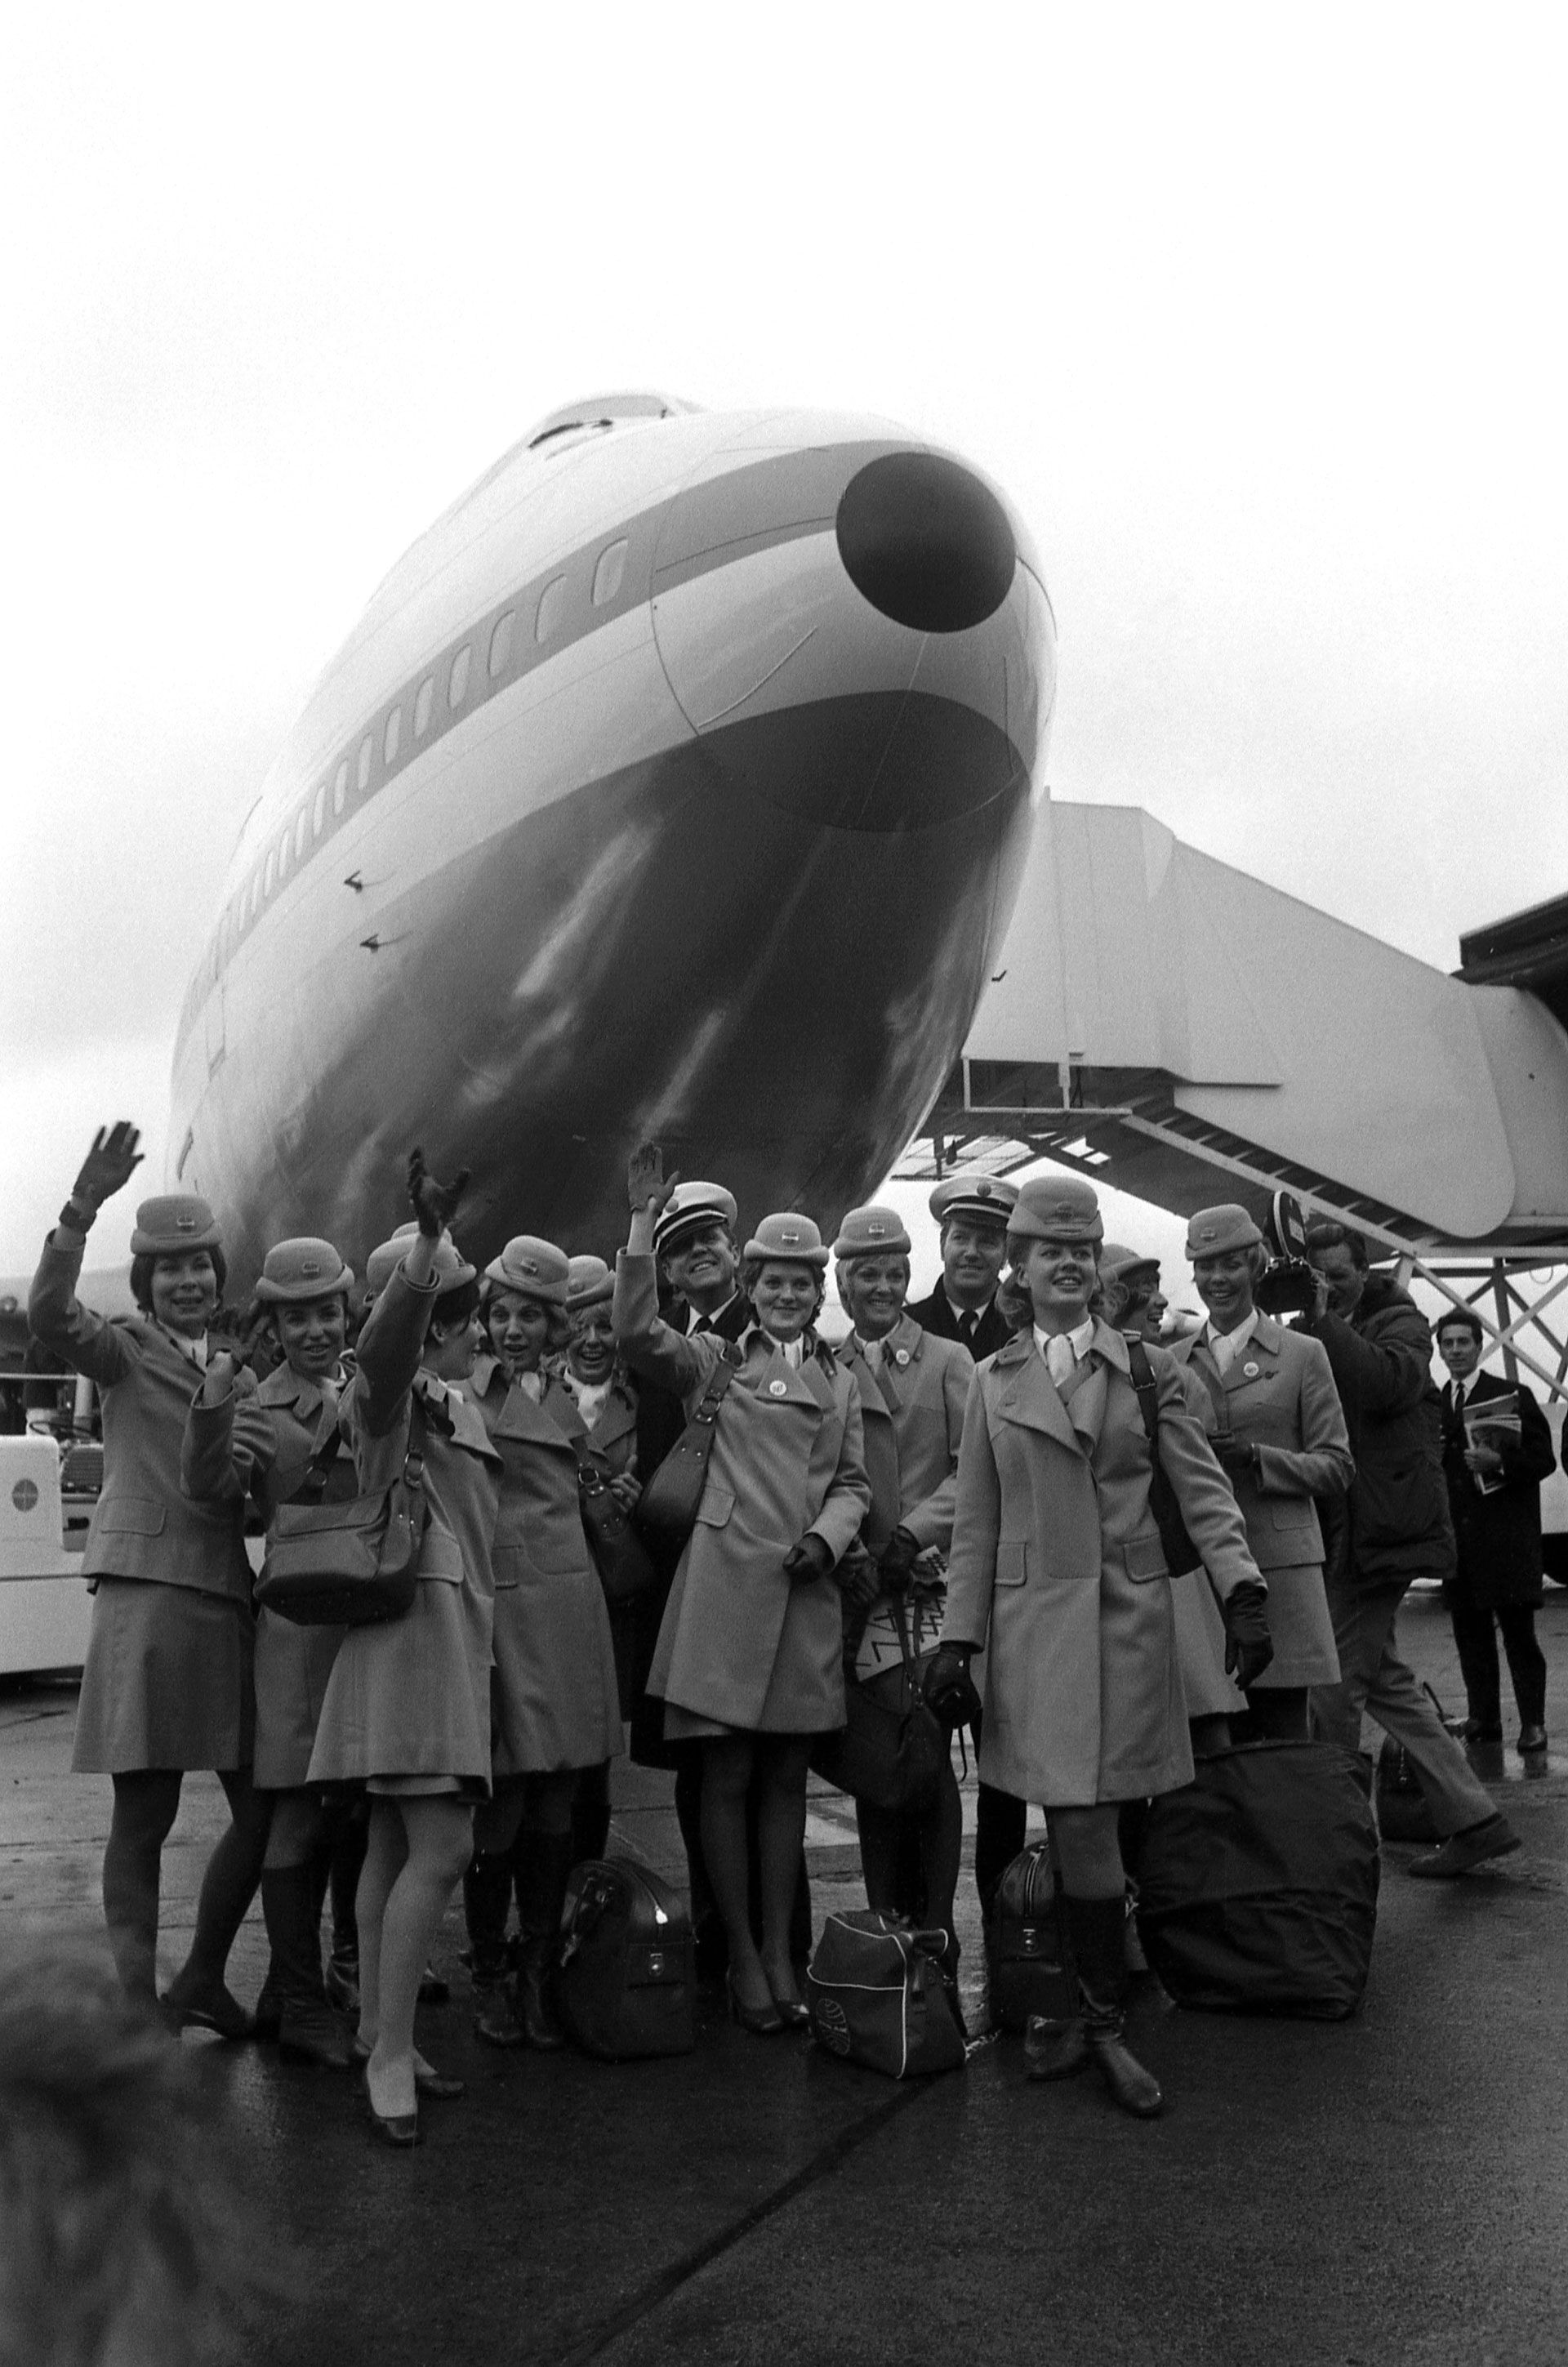 The crew of a Boeing 747 Jumbo Jet pose in front of the plane's nose at London's Heathrow Airport in England on January 12, 1970. This 360-seat aircraft was the first of its kind to complete a transatlantic crossing.  AP/File